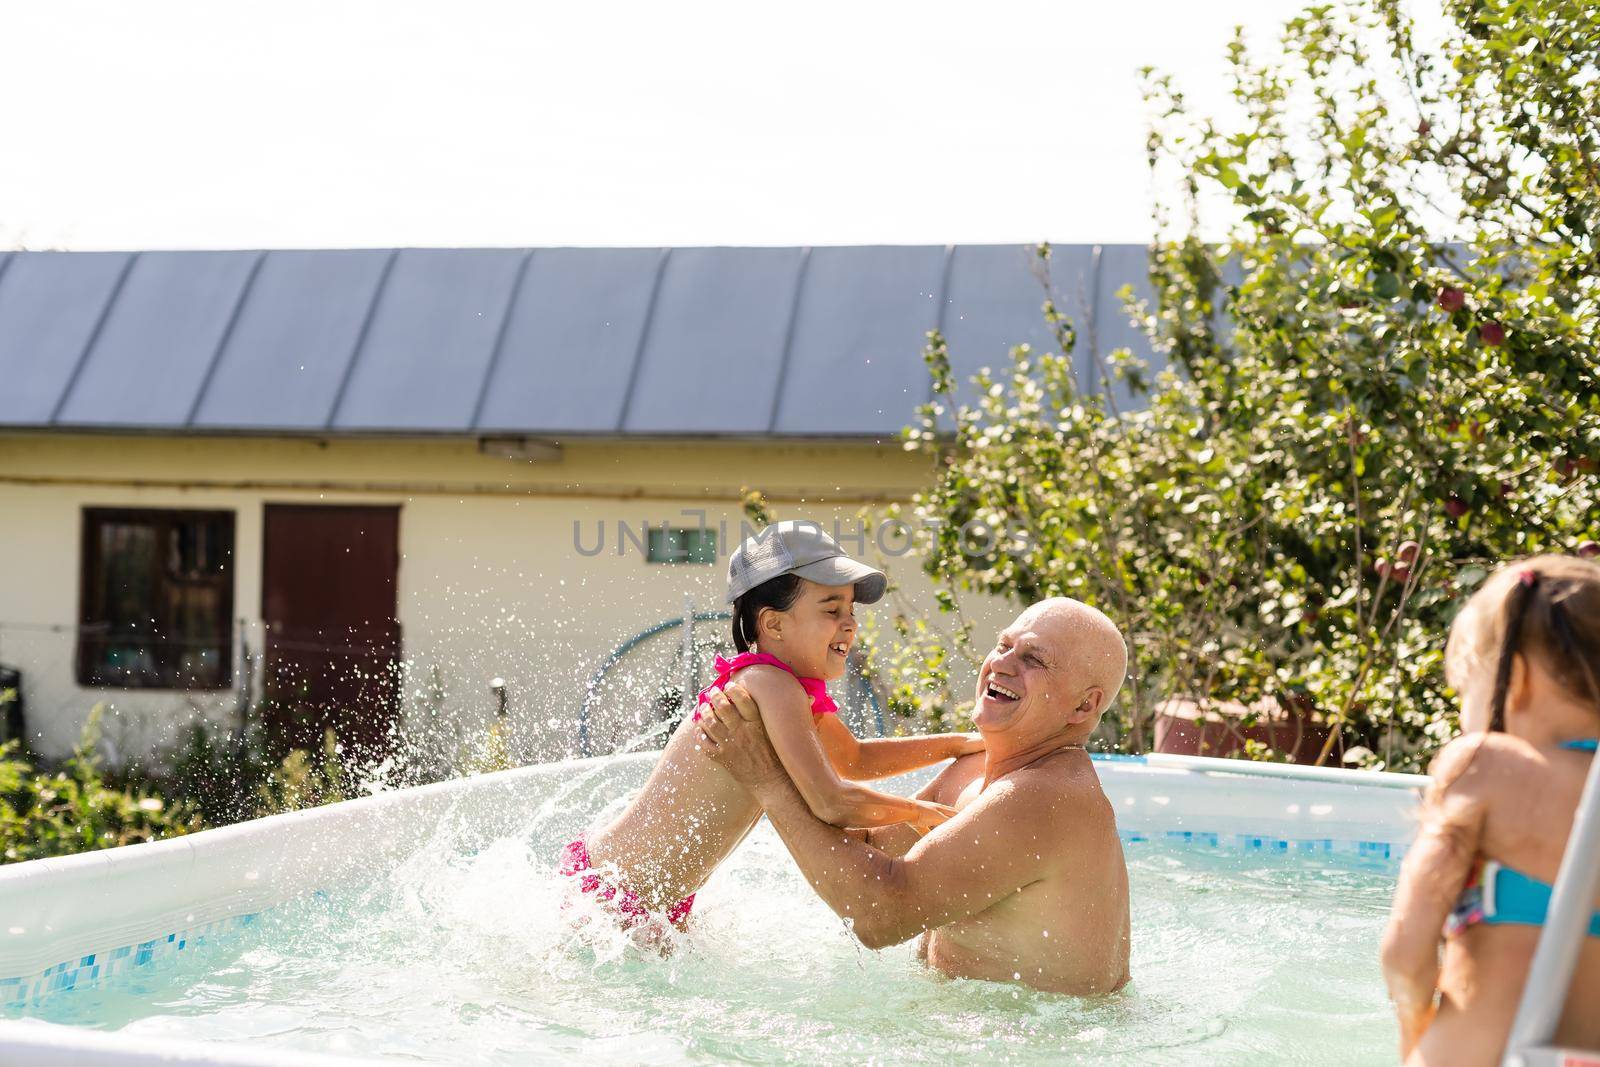 Portrait of a happy grandfather with grandchildren in pool by Andelov13